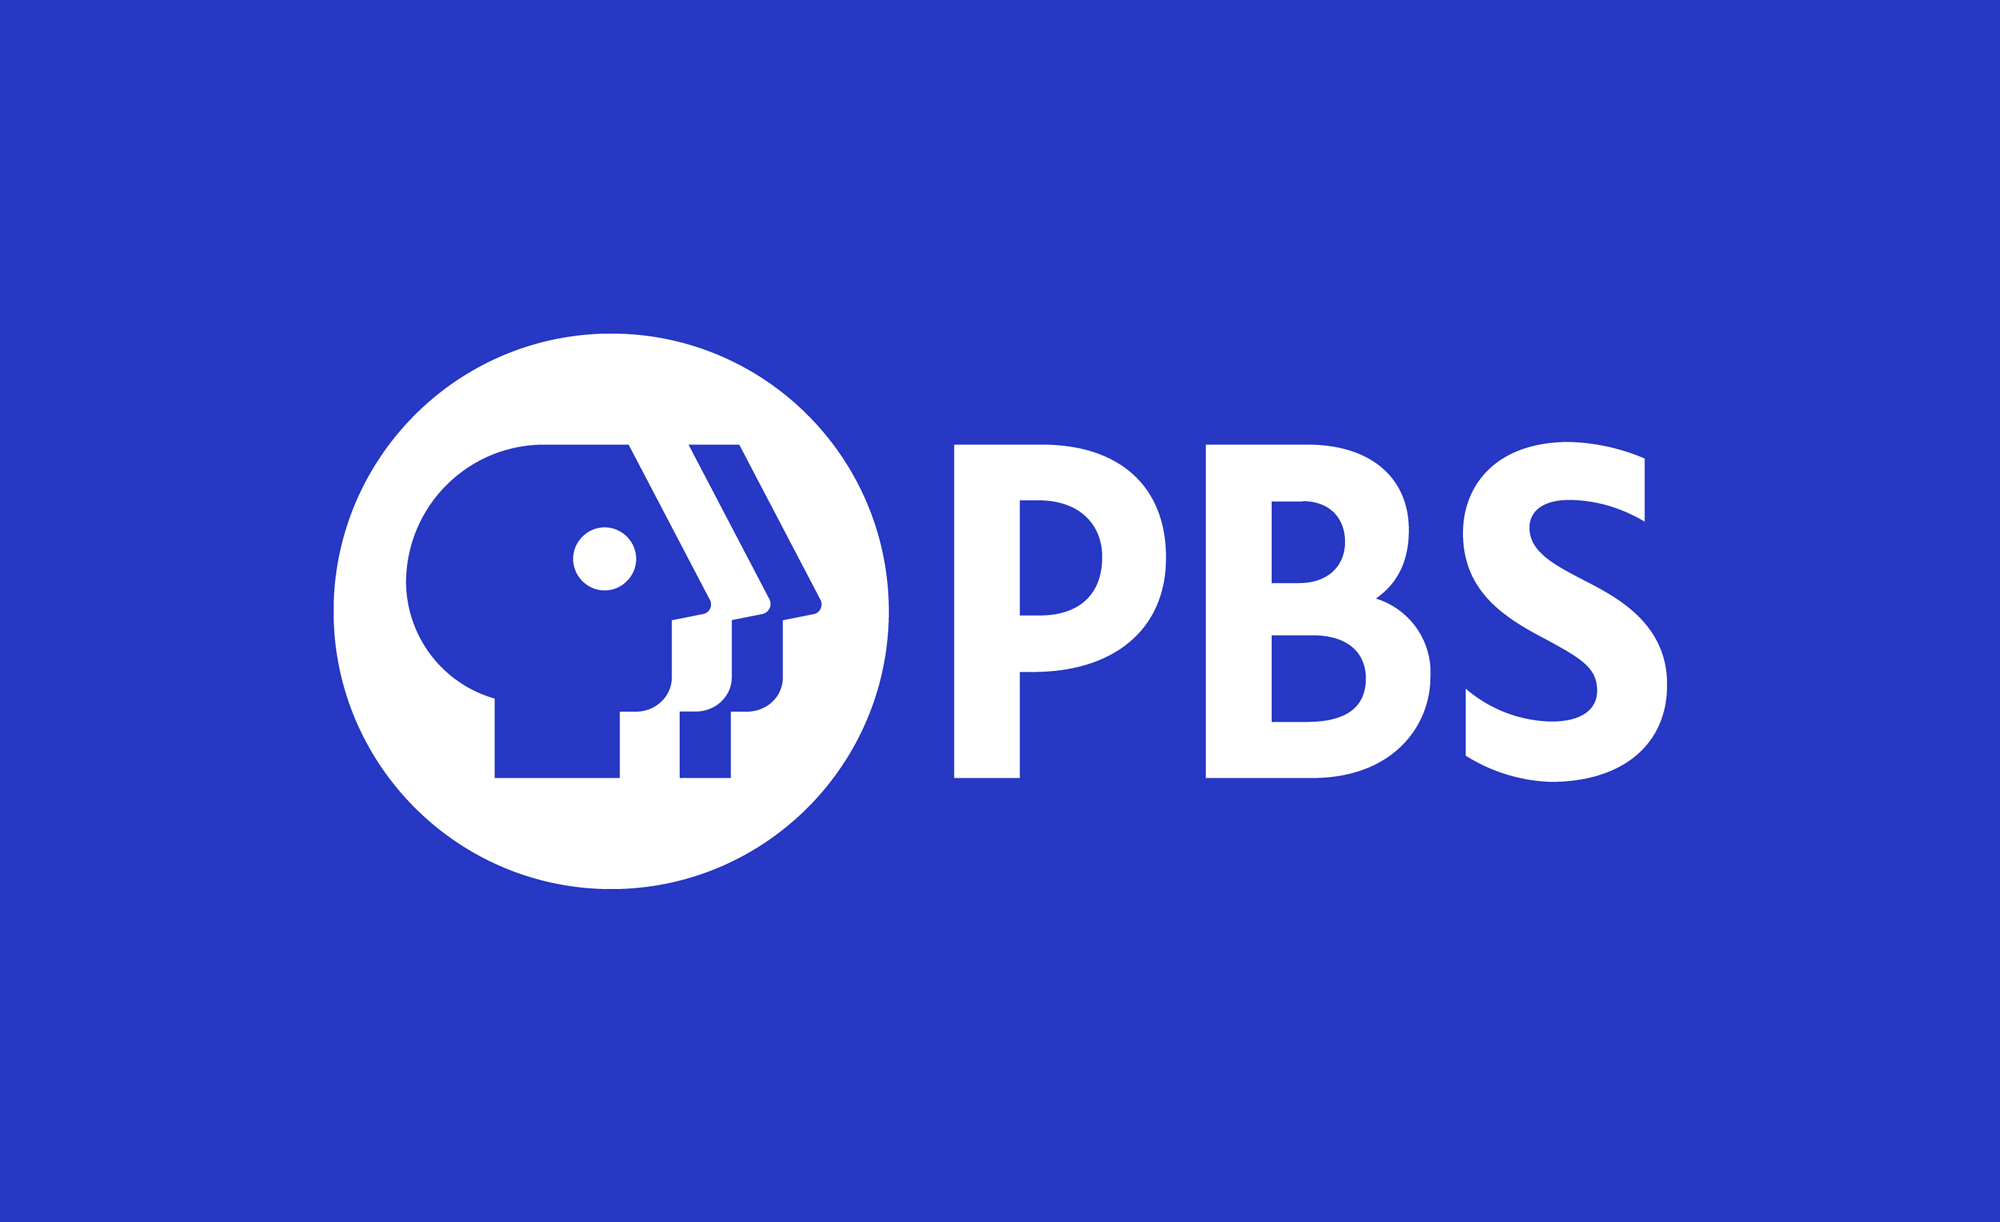 Brand New: New Logo for PBS by Lippincott